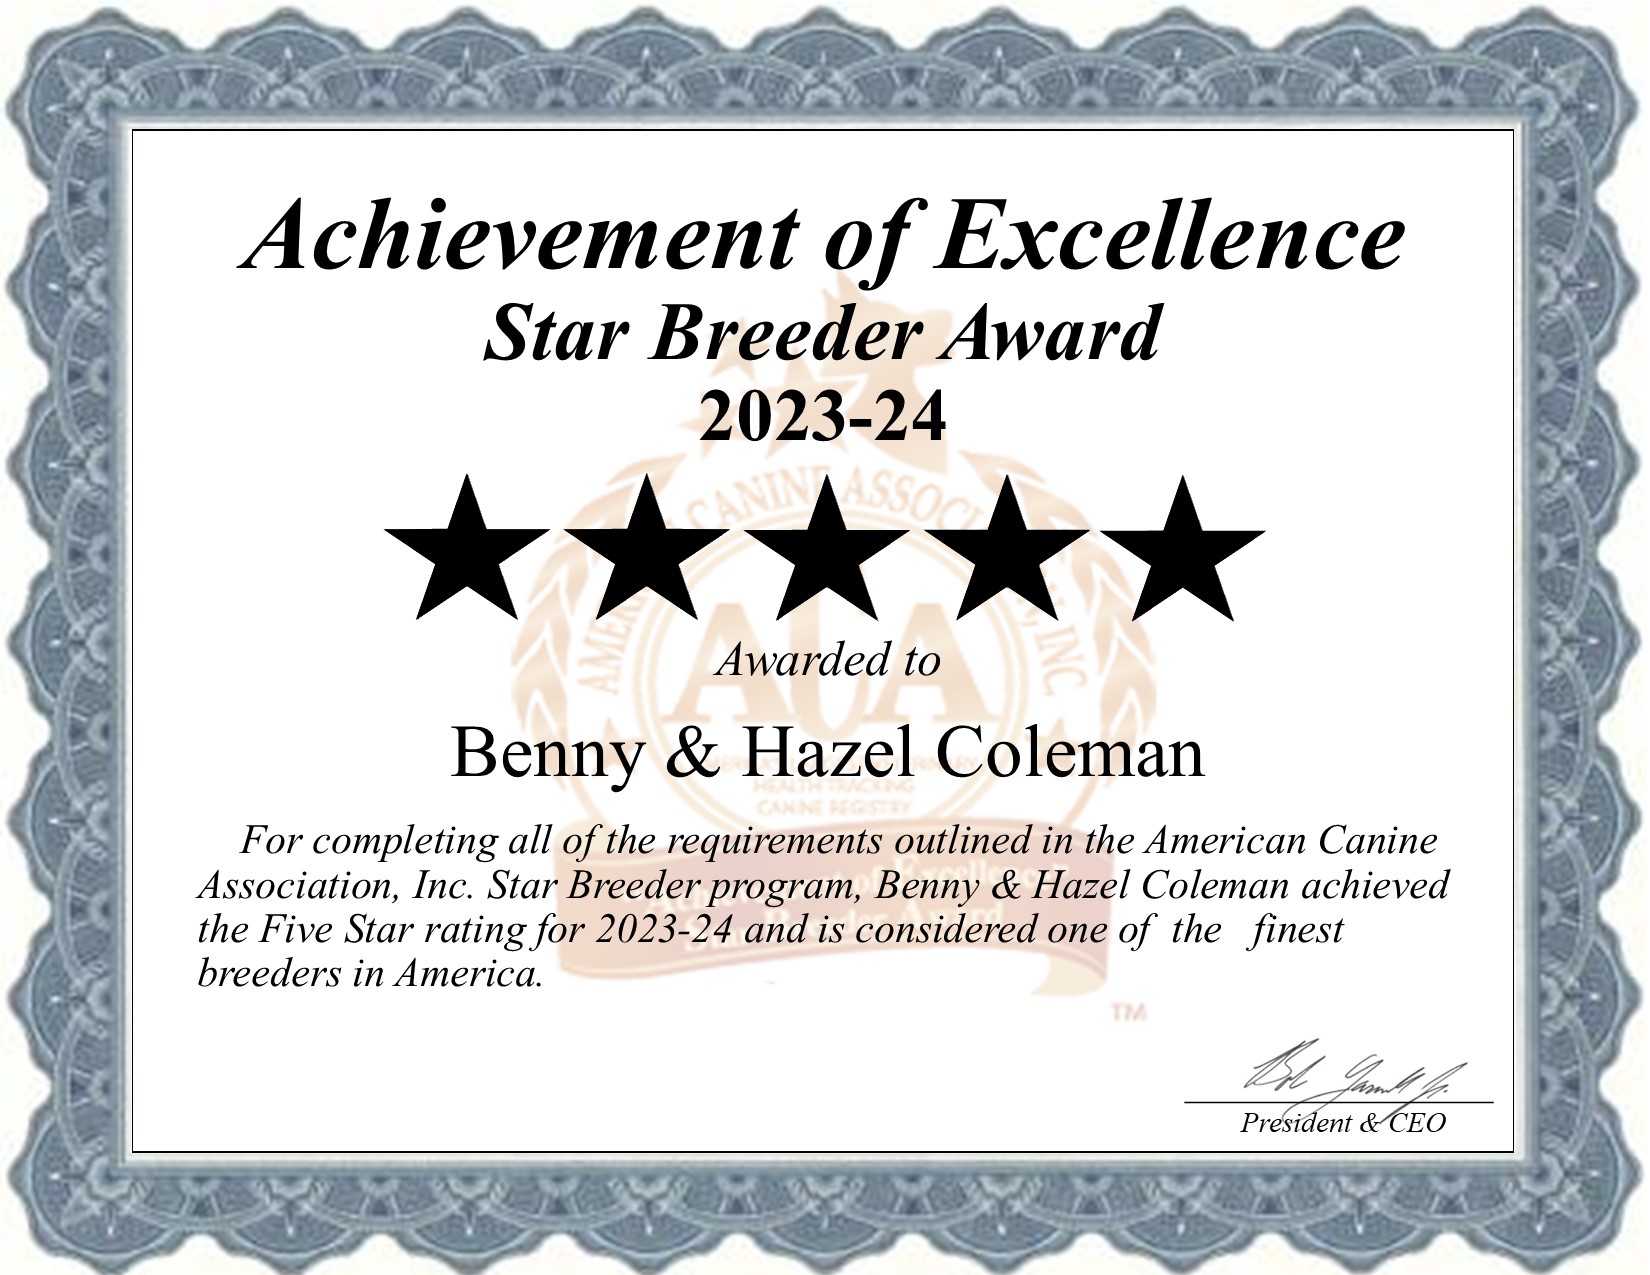 Benny and Hazel, Coleman, dog, breeder, star, certificate, Benny and Hazel-Coleman, Lebanon, MO, Missouri, puppy, dog, kennels, mill, puppymill, usda, 5-star, aca, ica, registered, Chihuahua, none